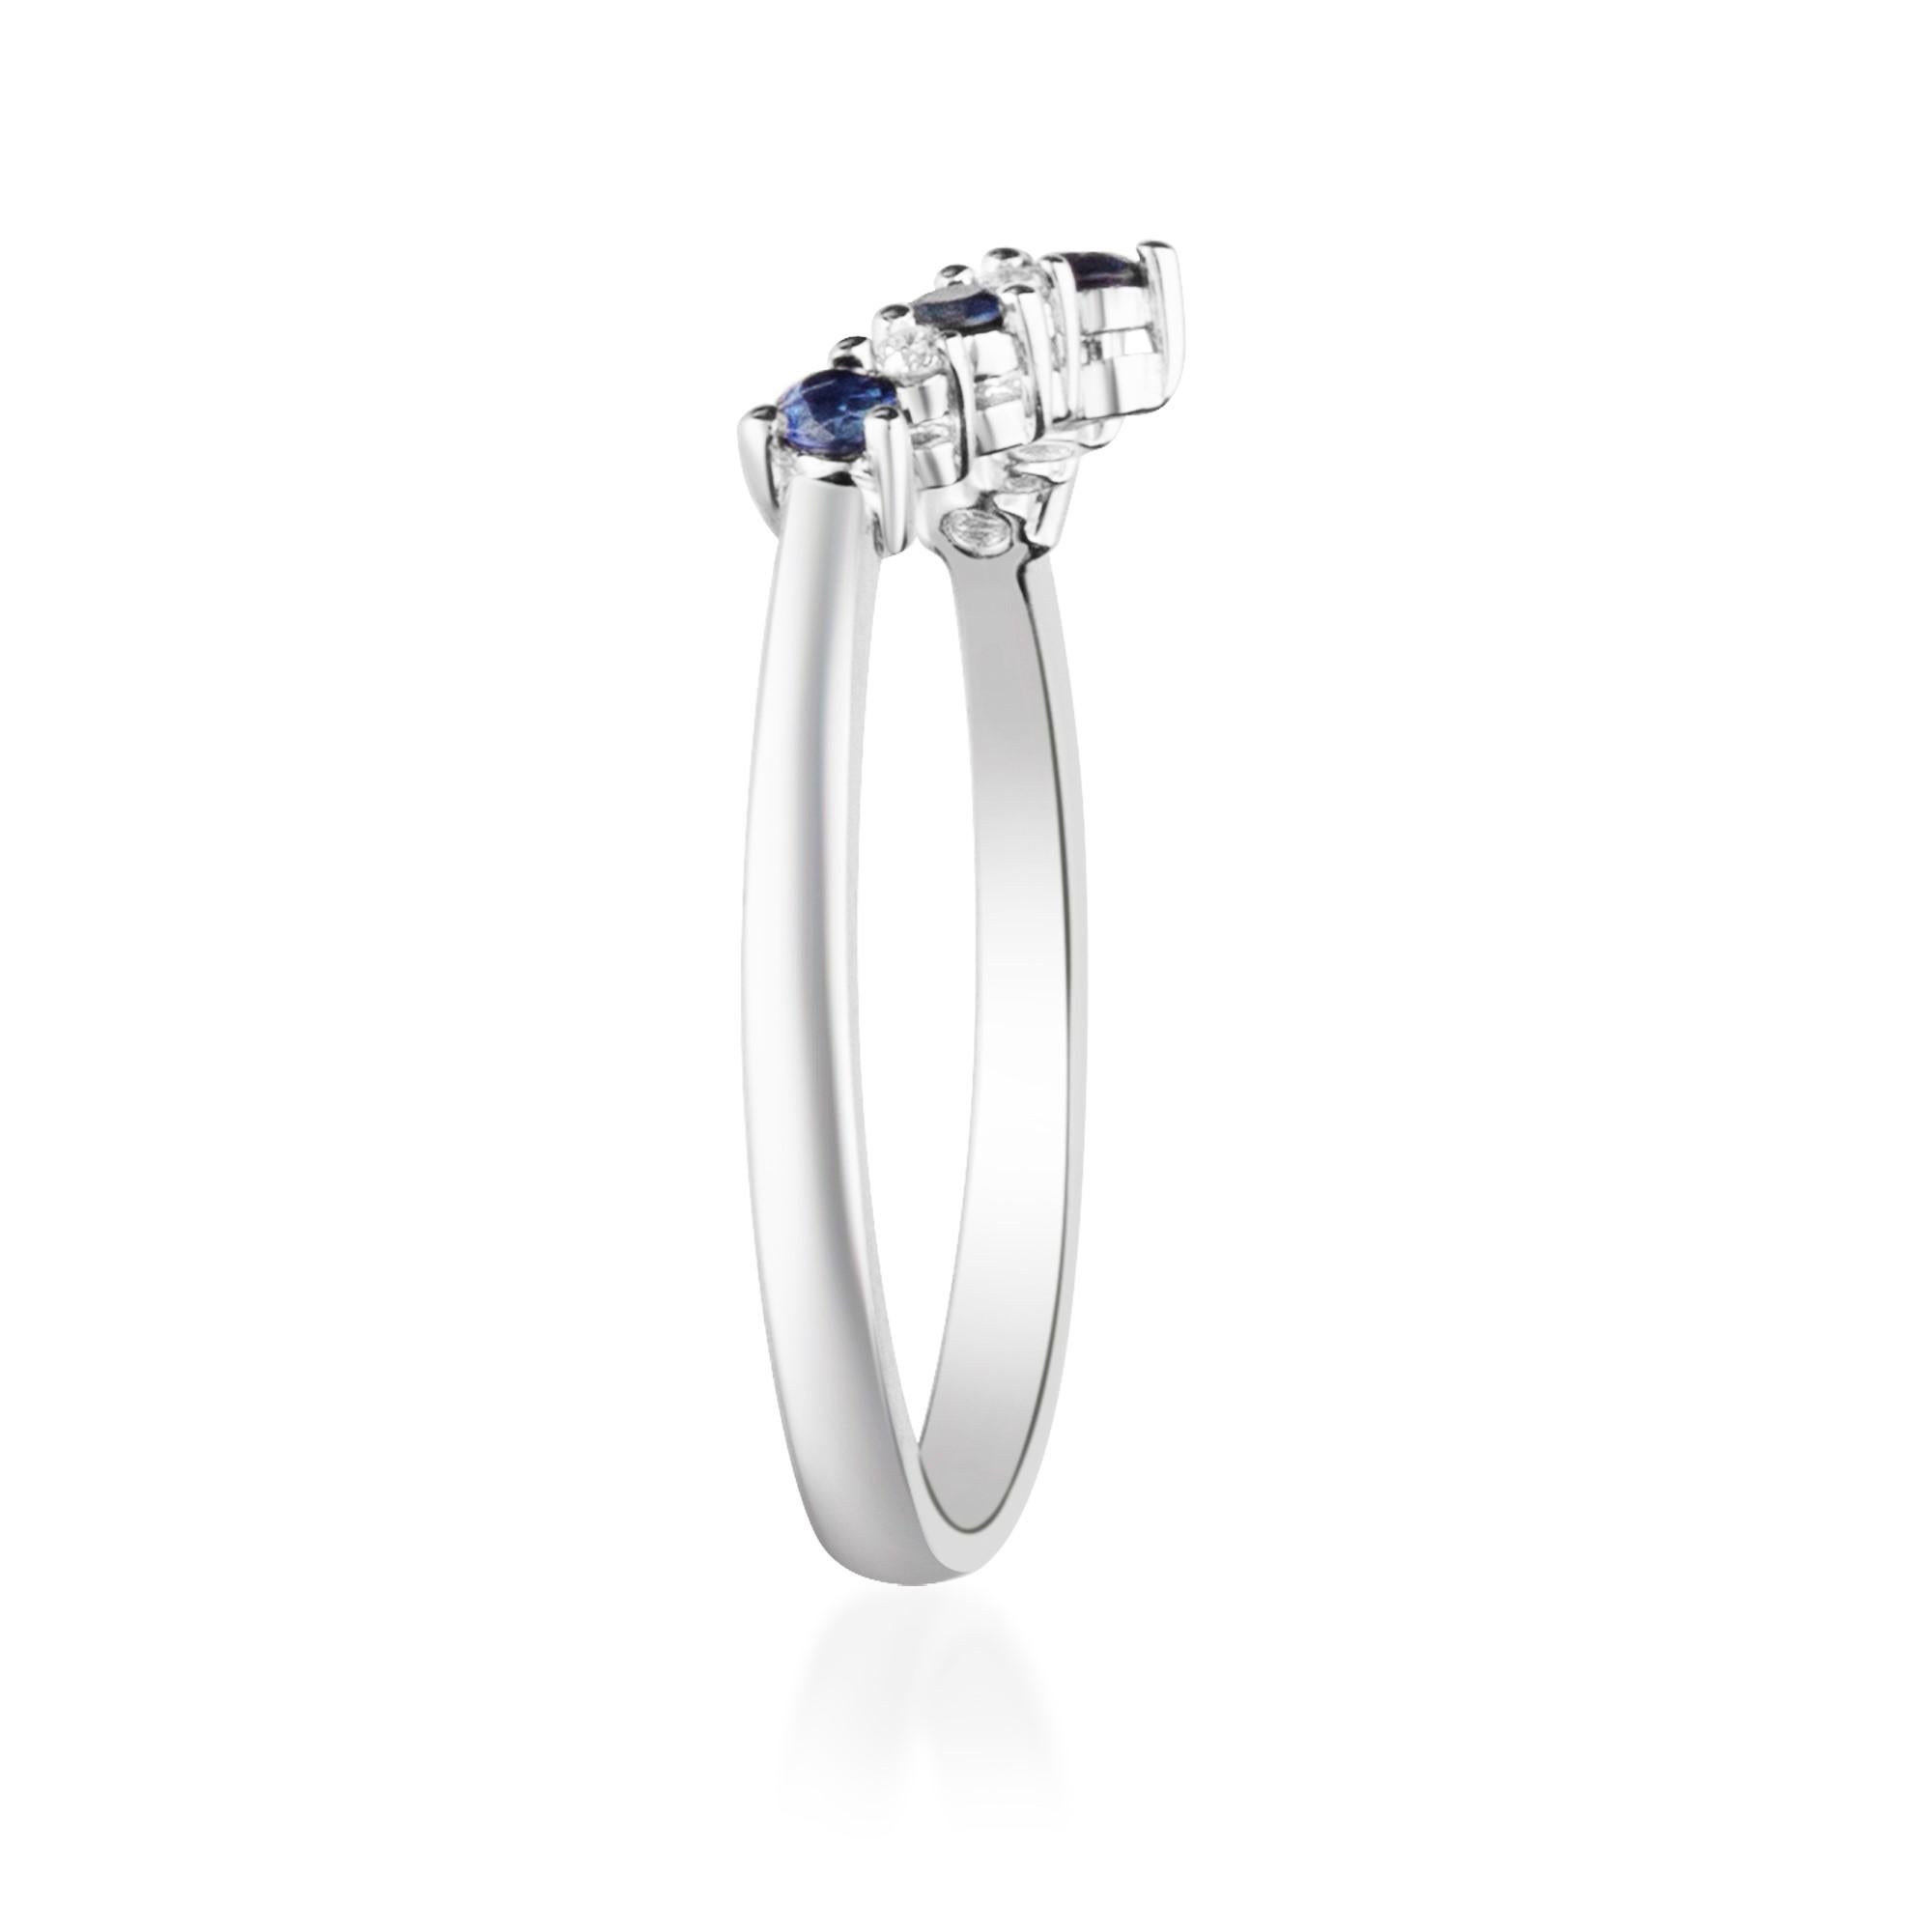 This ring brings an elegant touch to any outfit. Featuring Gin& Grace Genuine Blue Sapphire gemstones offset by 4 Pcs diamonds and a 10k white gold band that provides a luxurious backdrop to the brilliant gemstones, this ring makes a great statement